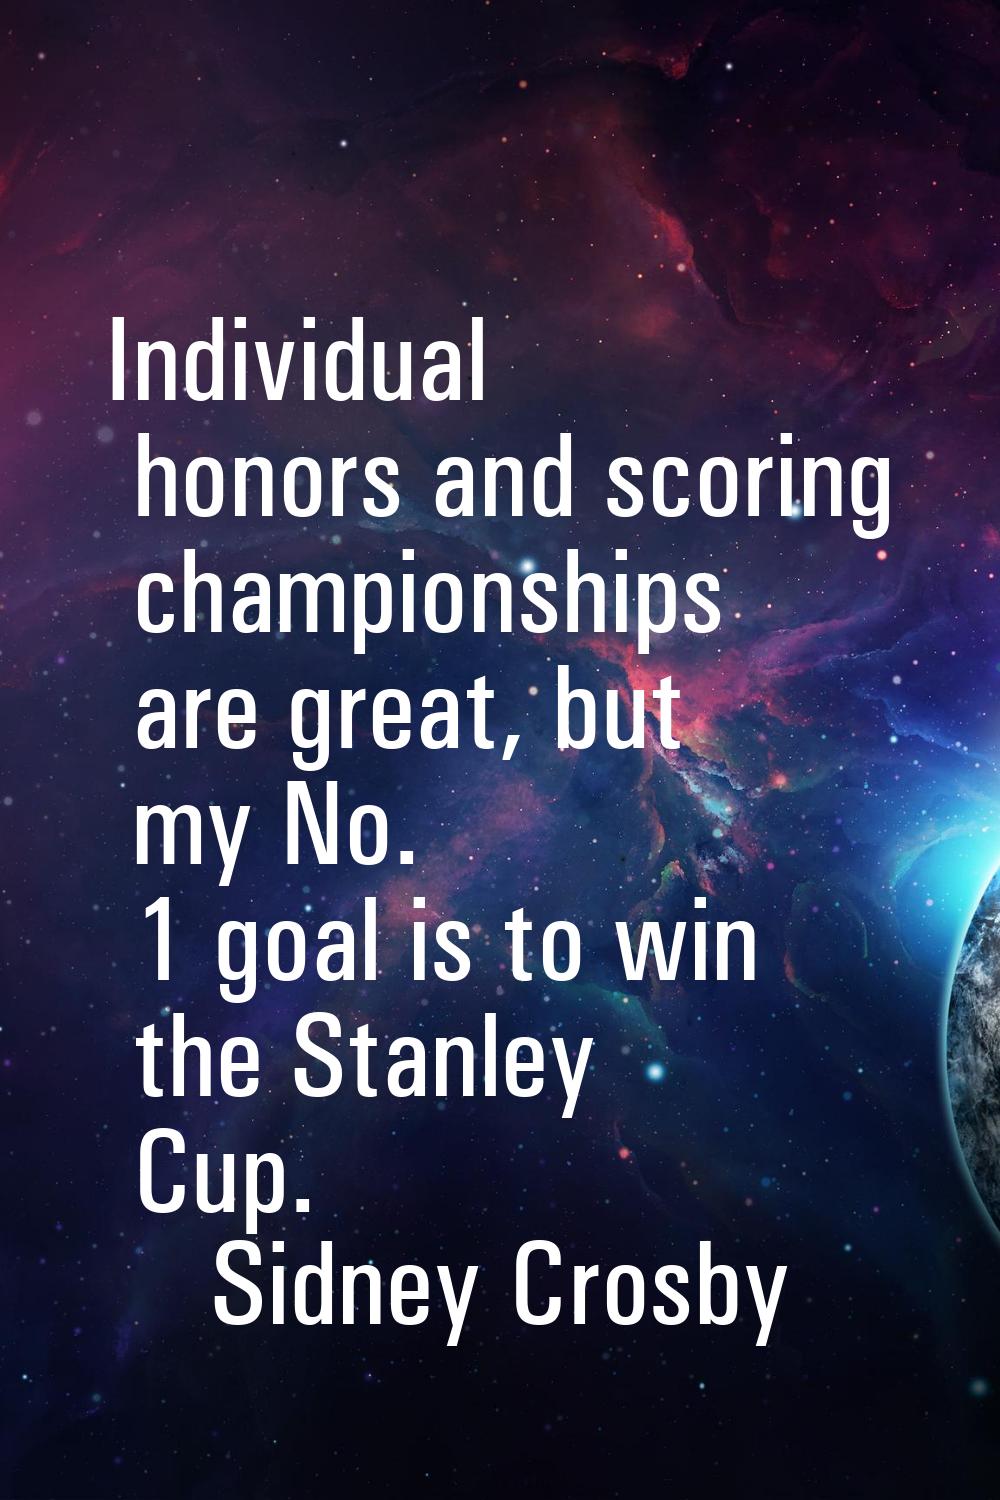 Individual honors and scoring championships are great, but my No. 1 goal is to win the Stanley Cup.